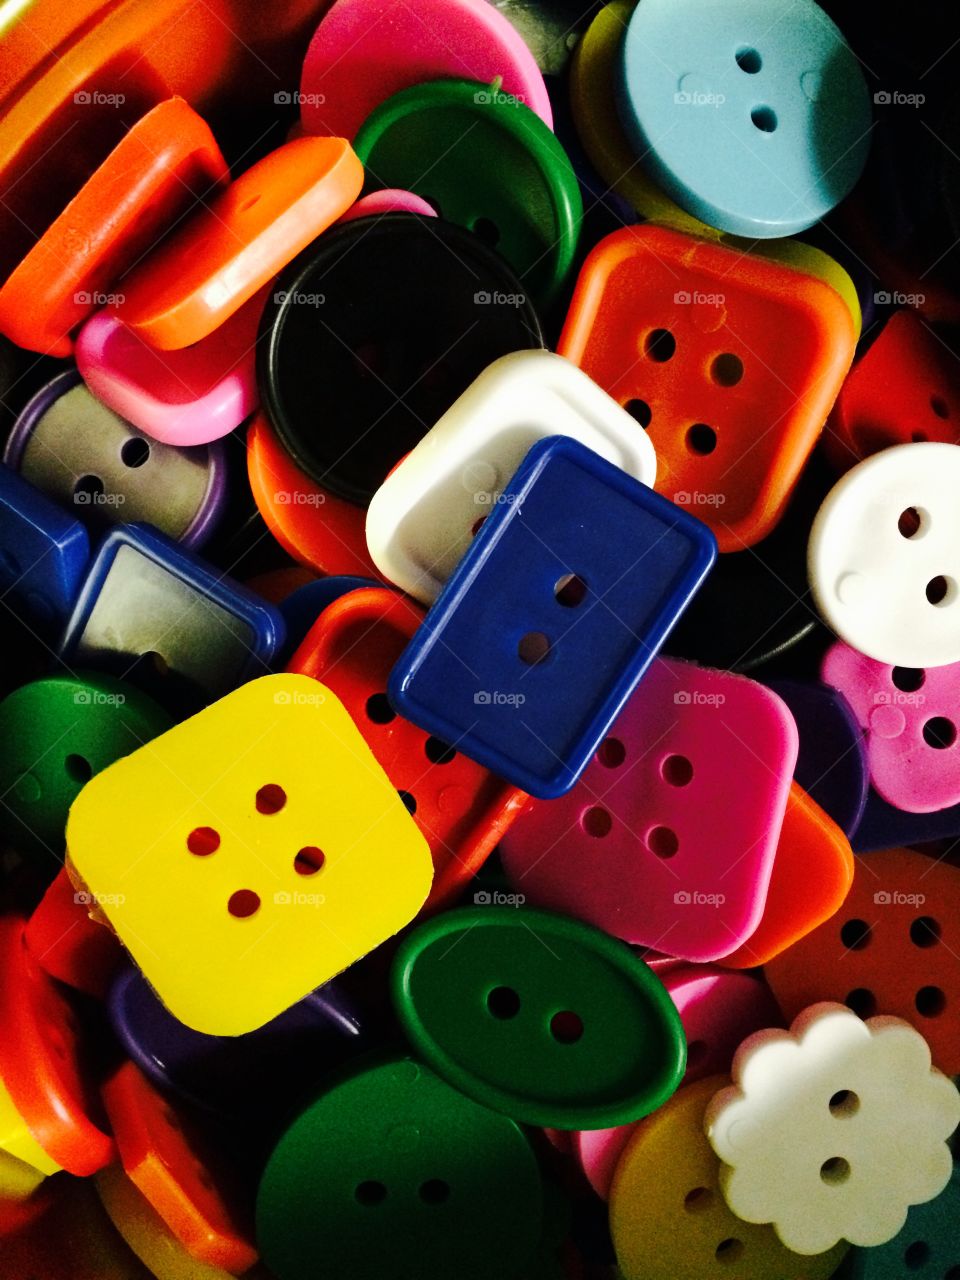 Buttons. Loose colorful buttons